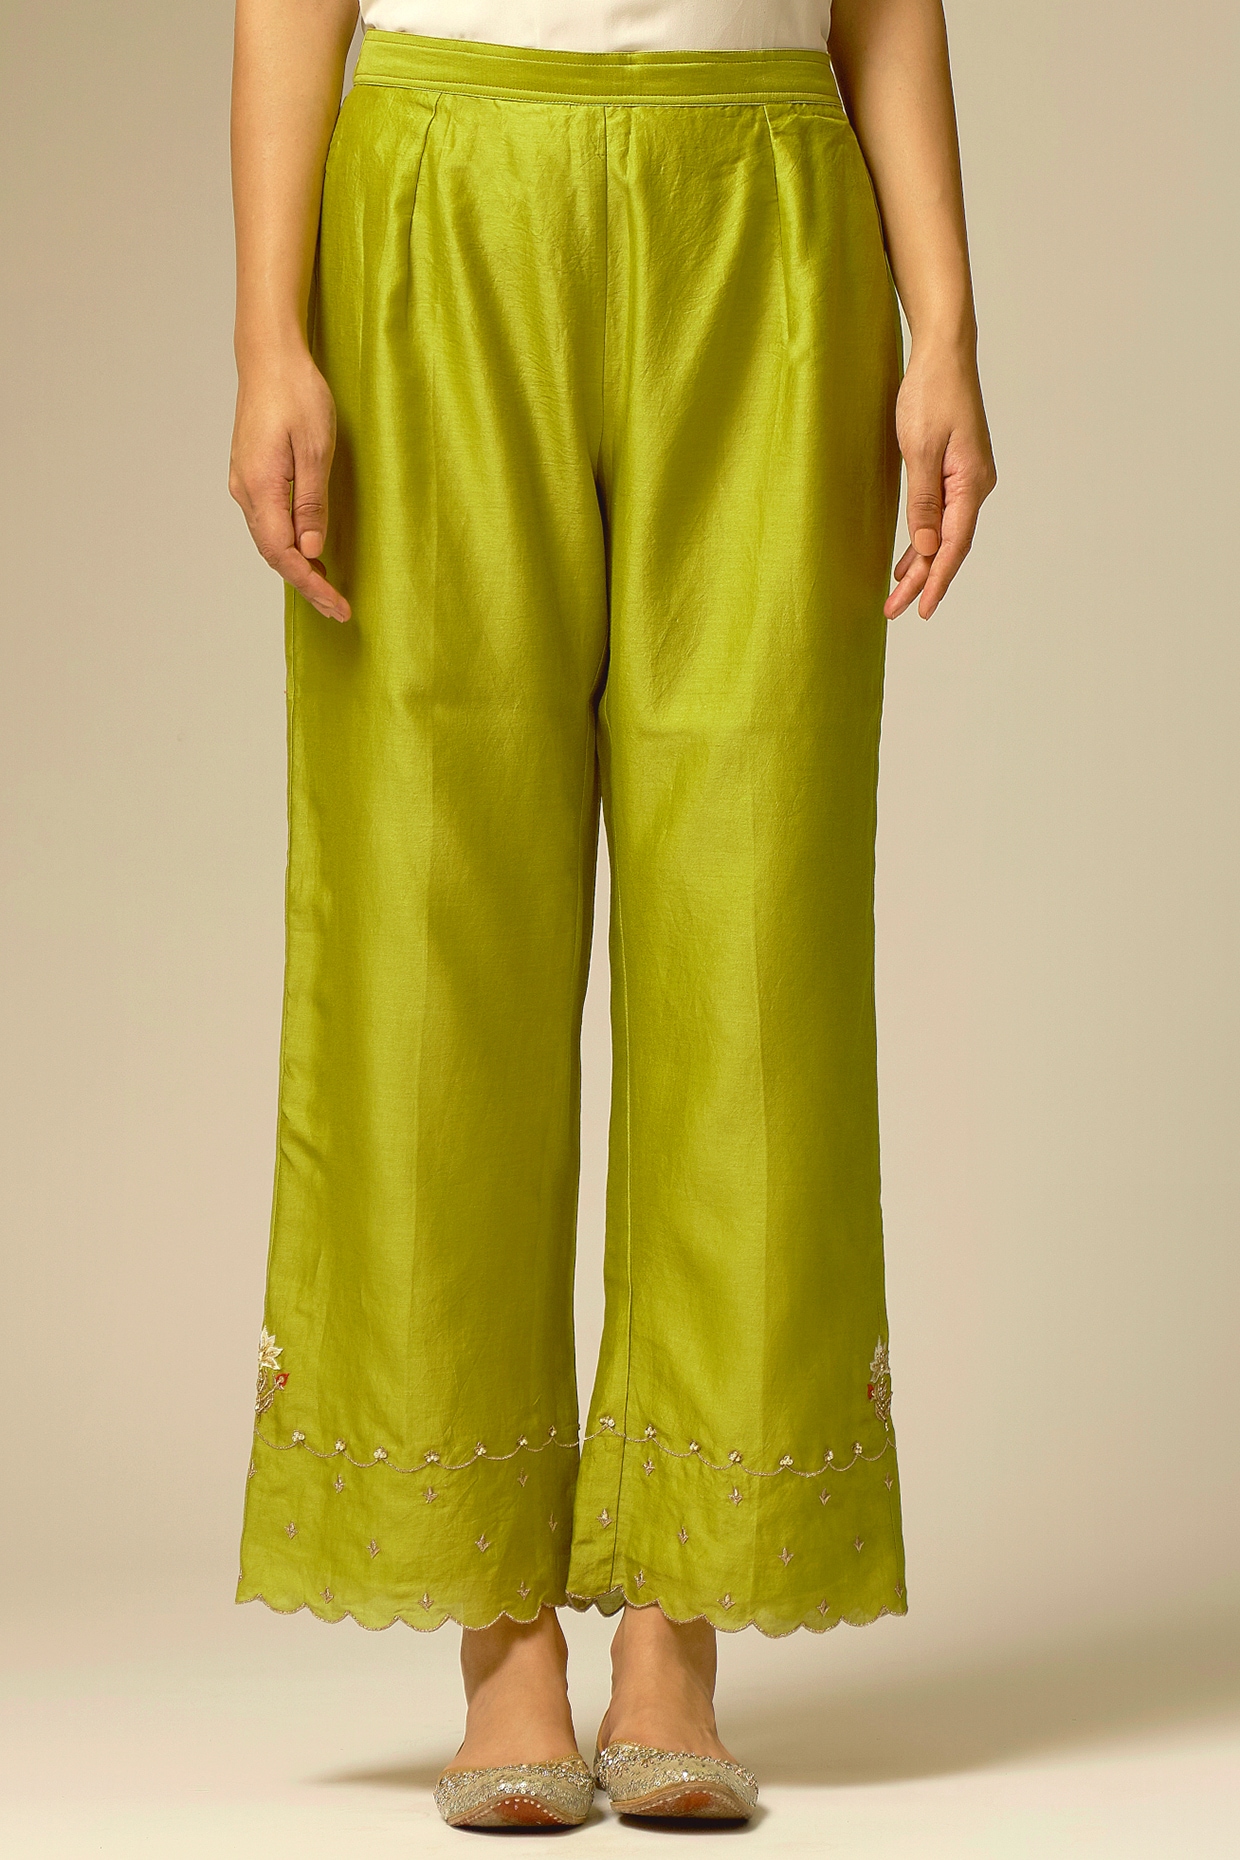 Bottle Green Pleated Palazzo Pants Design by First Resort by Ramola  Bachchan at Pernia's Pop Up Shop 2024